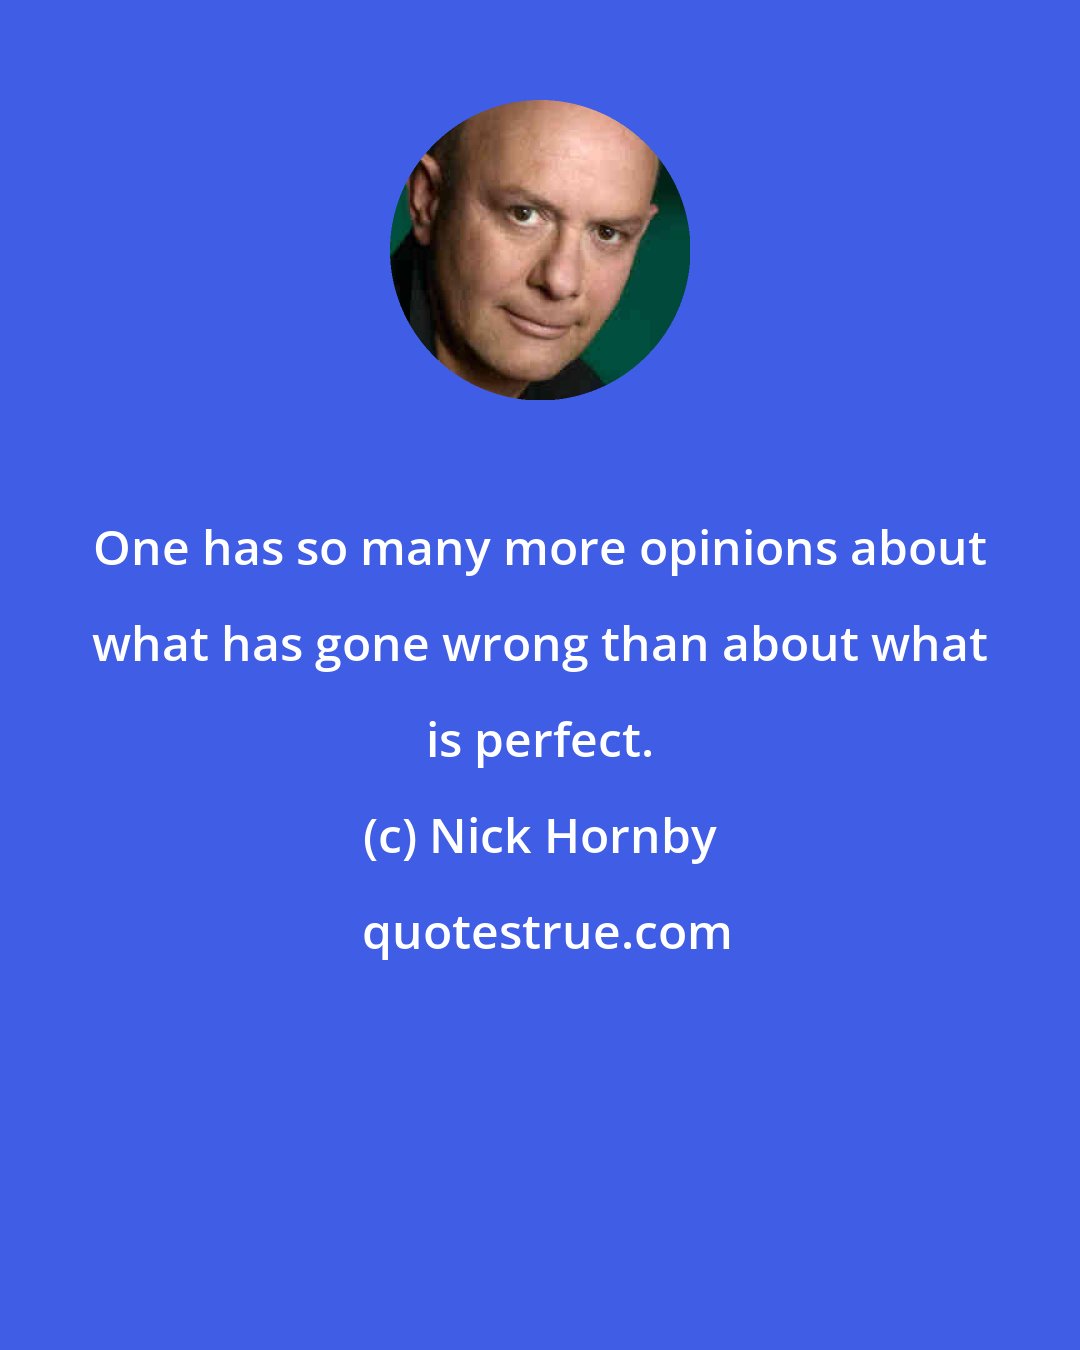 Nick Hornby: One has so many more opinions about what has gone wrong than about what is perfect.